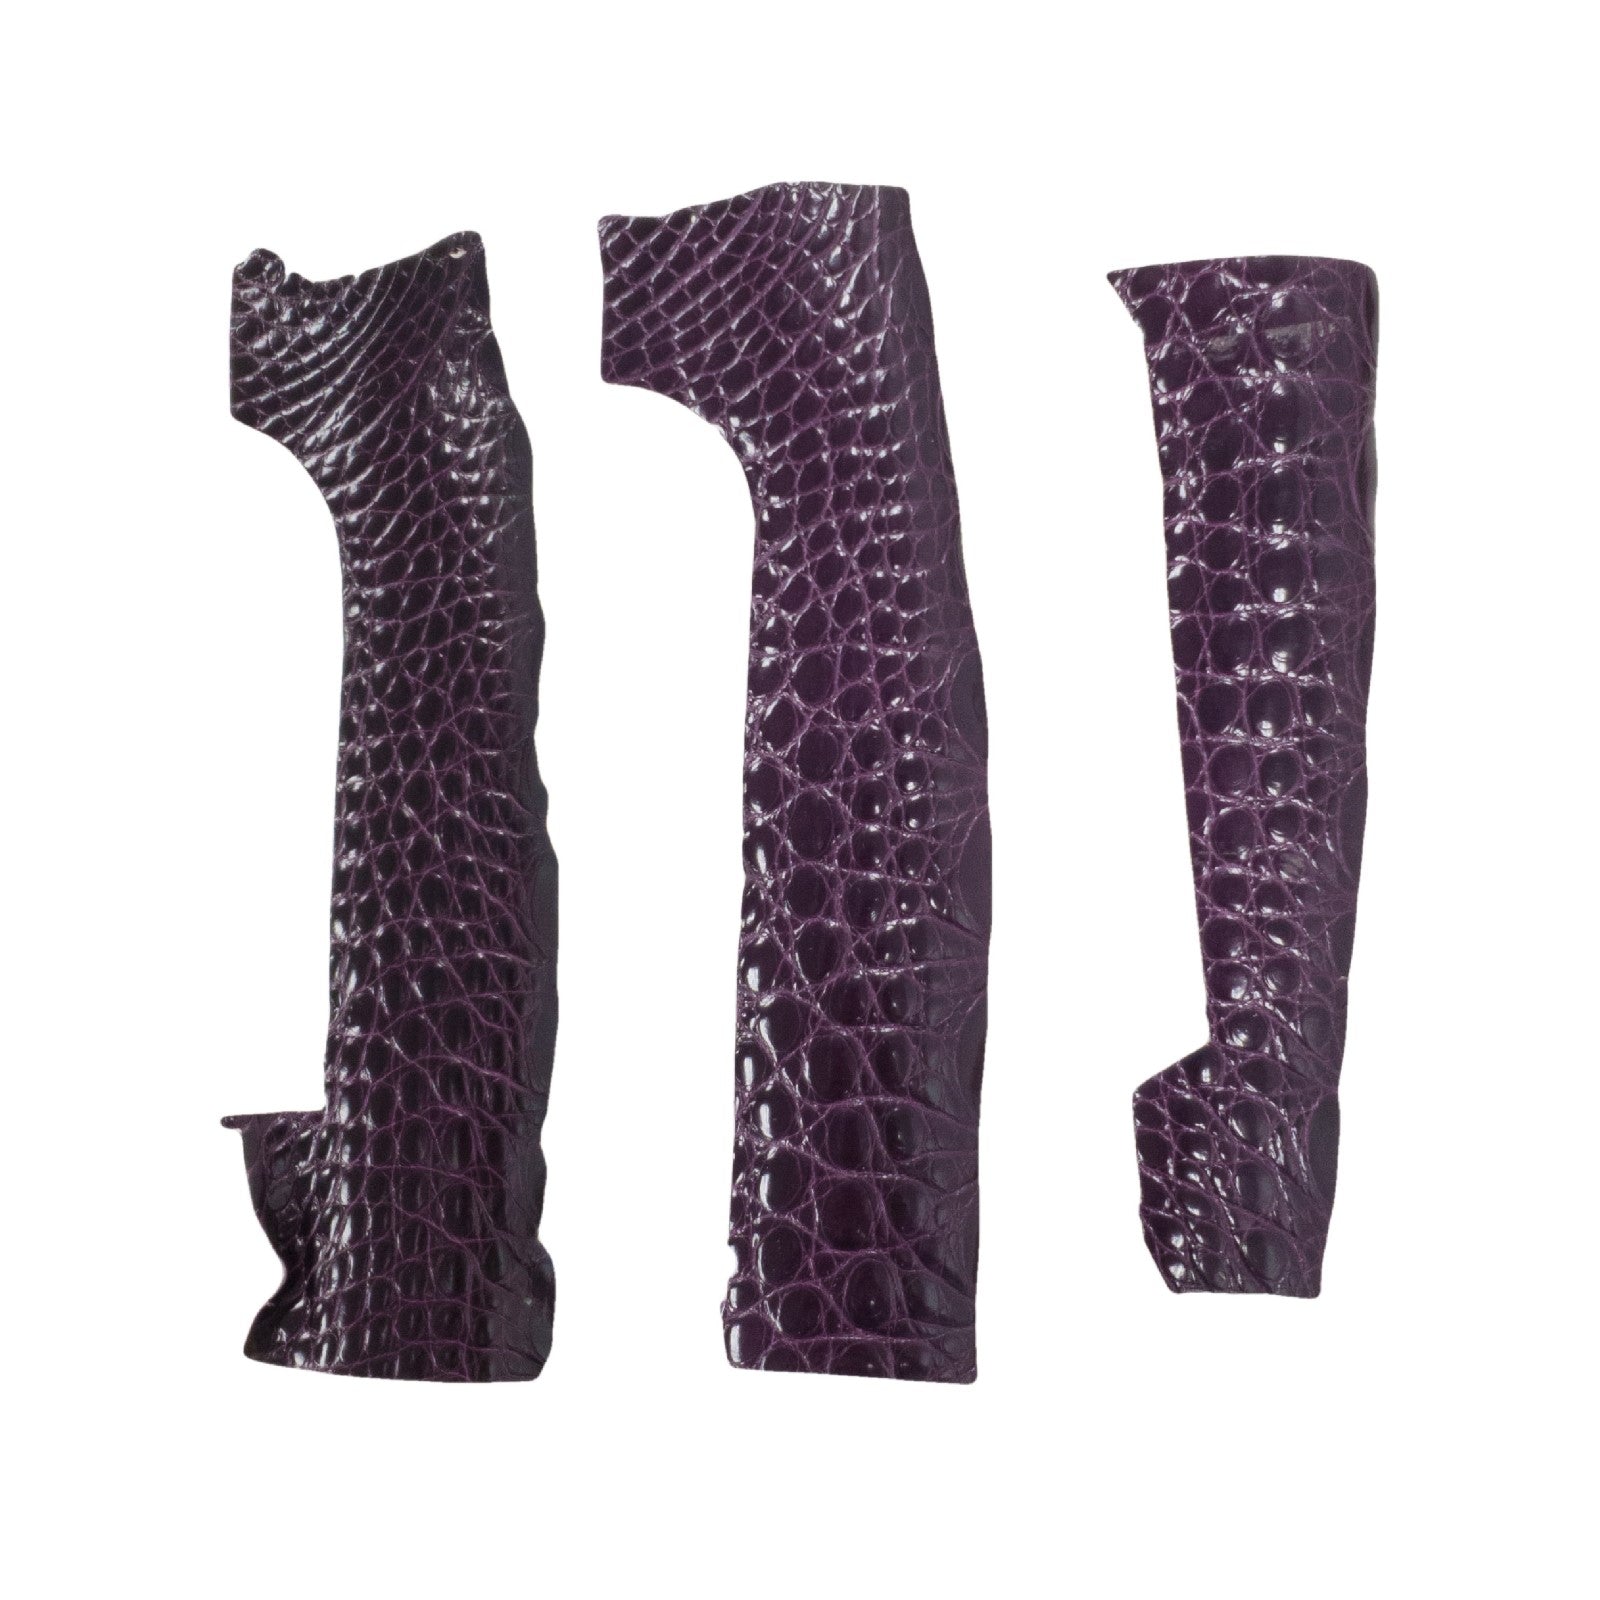 Alligator Skin Pieces Various Colors Genuine Hide, Purple / Strap 2 | The Leather Guy